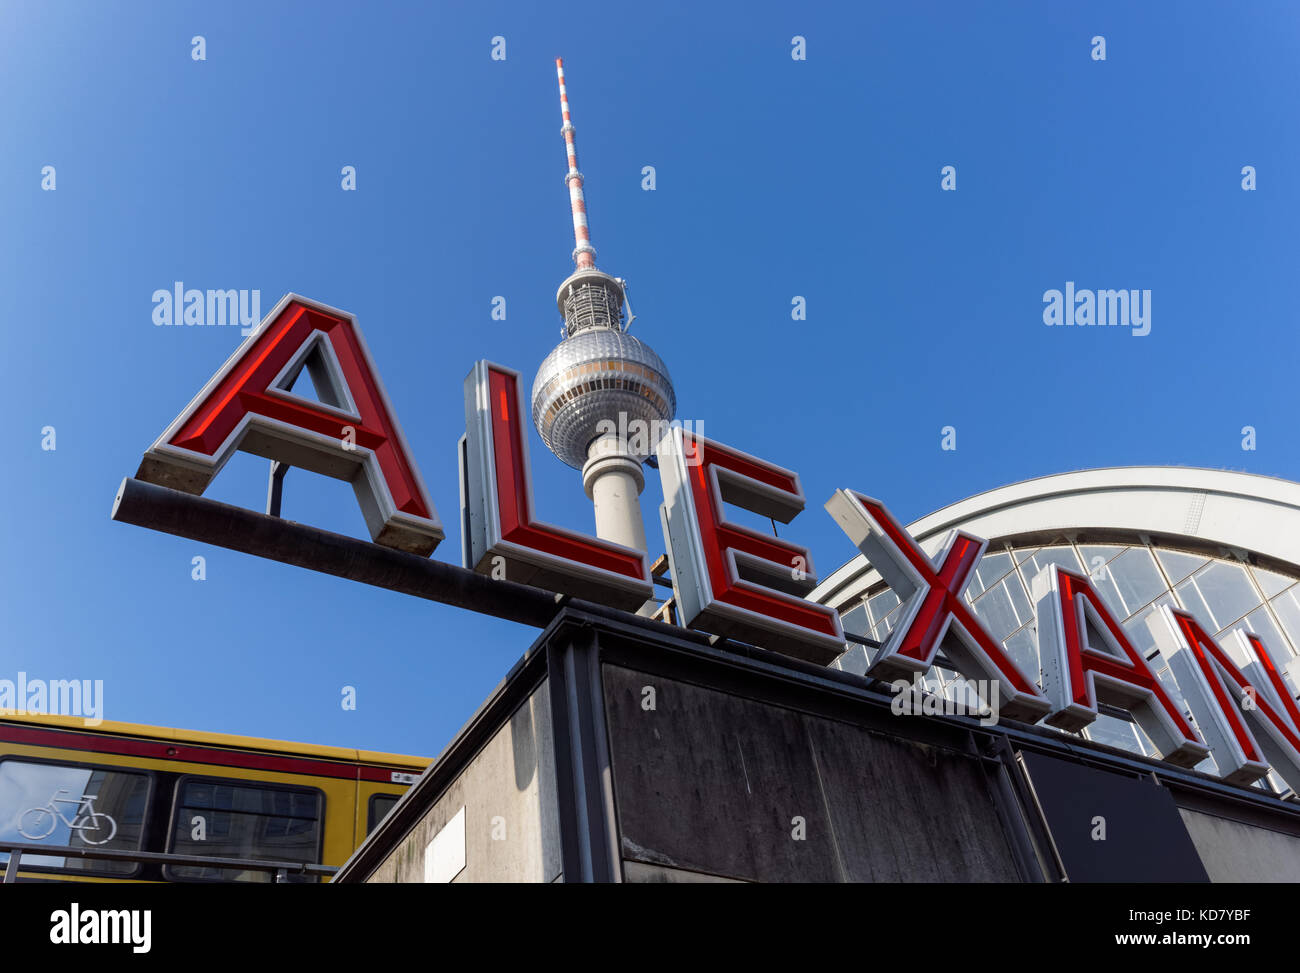 Alexanderplatz station and the Television Tower in Berlin, Germany Stock Photo